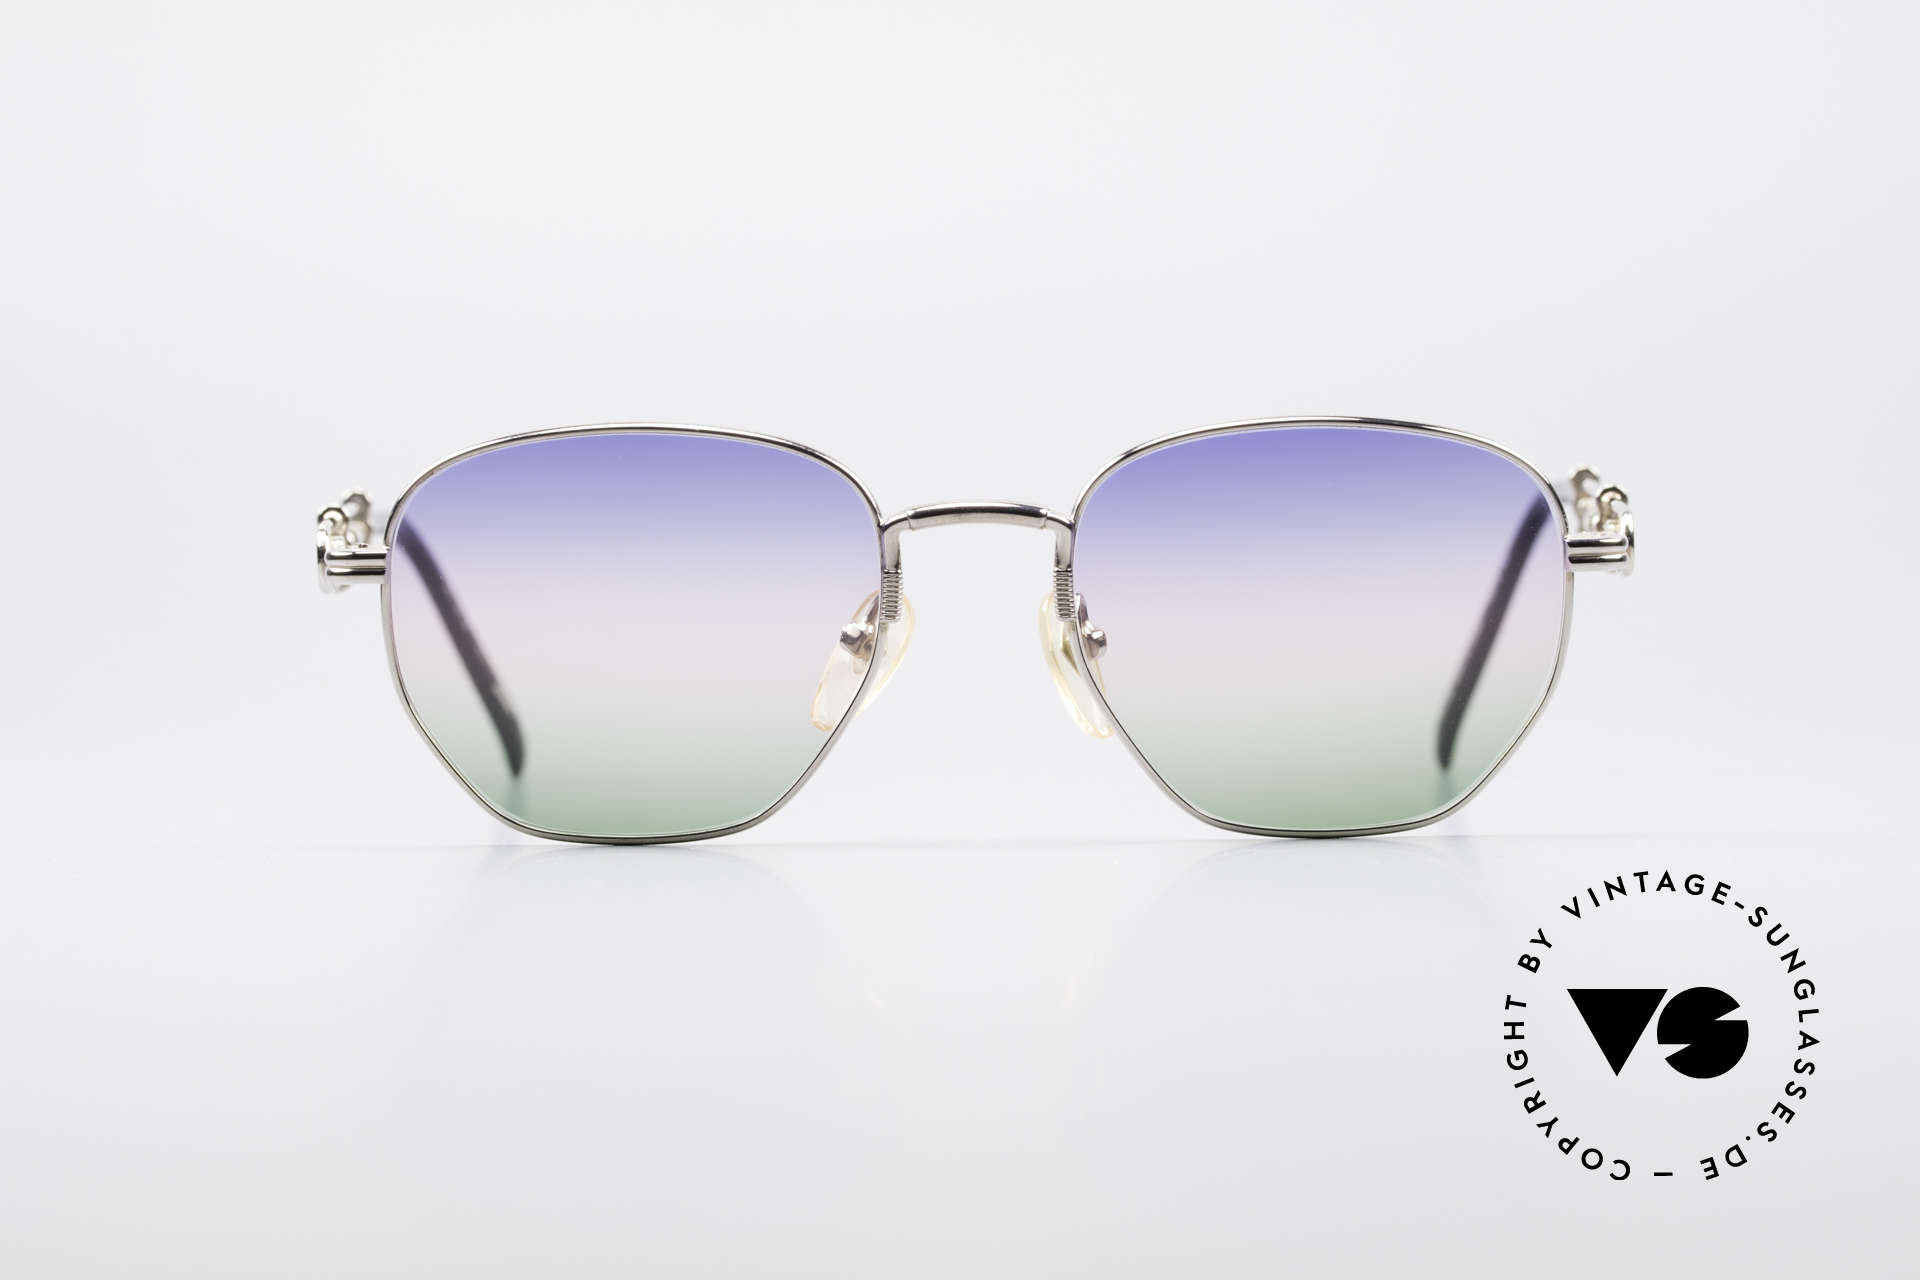 Jean Paul Gaultier 55-4174 Adjustable Vintage Frame, the frame is adjustable in terms of the arm lengths, Made for Men and Women